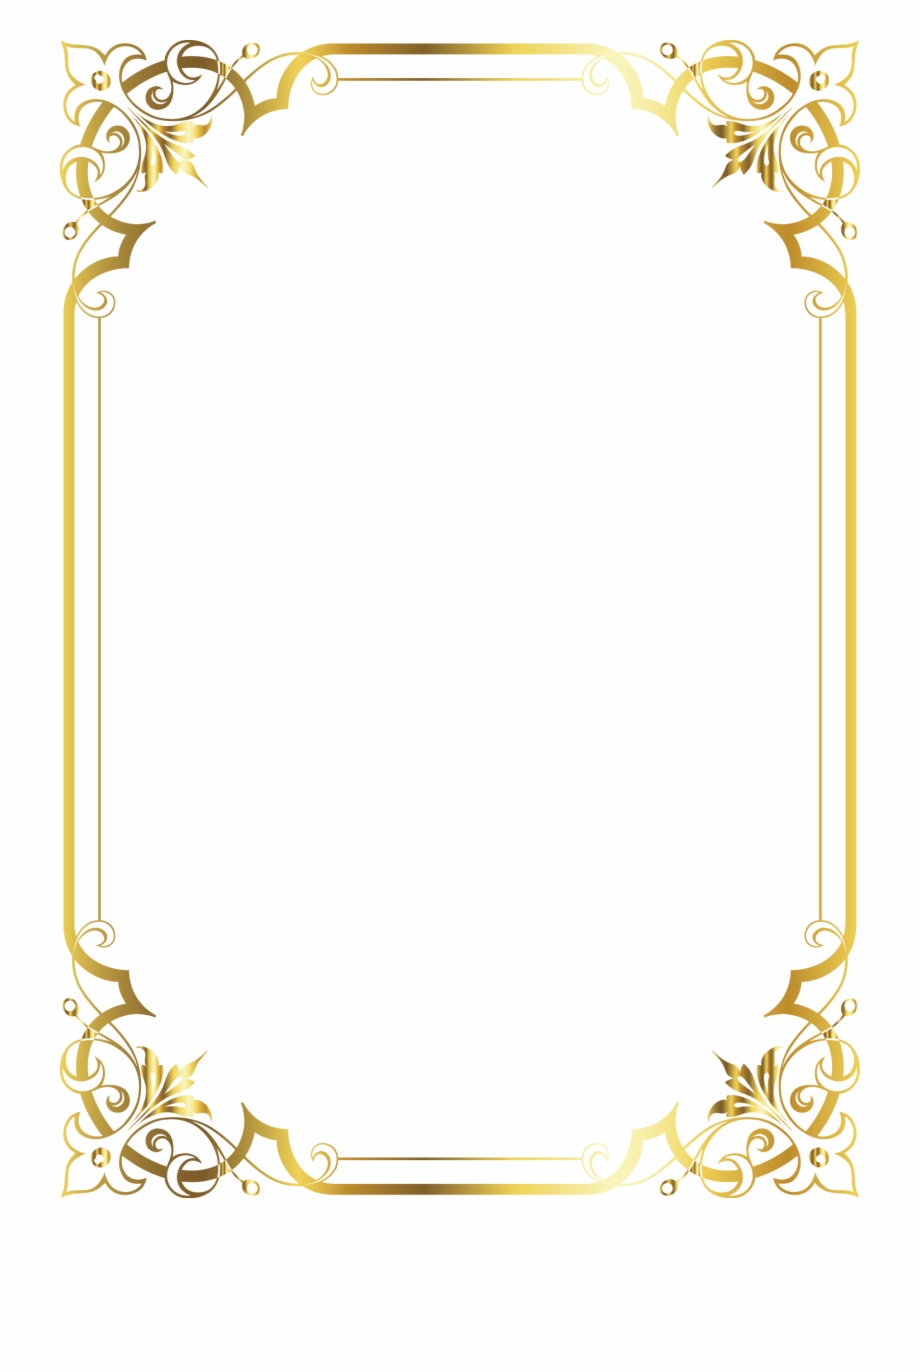 Borders And Frames